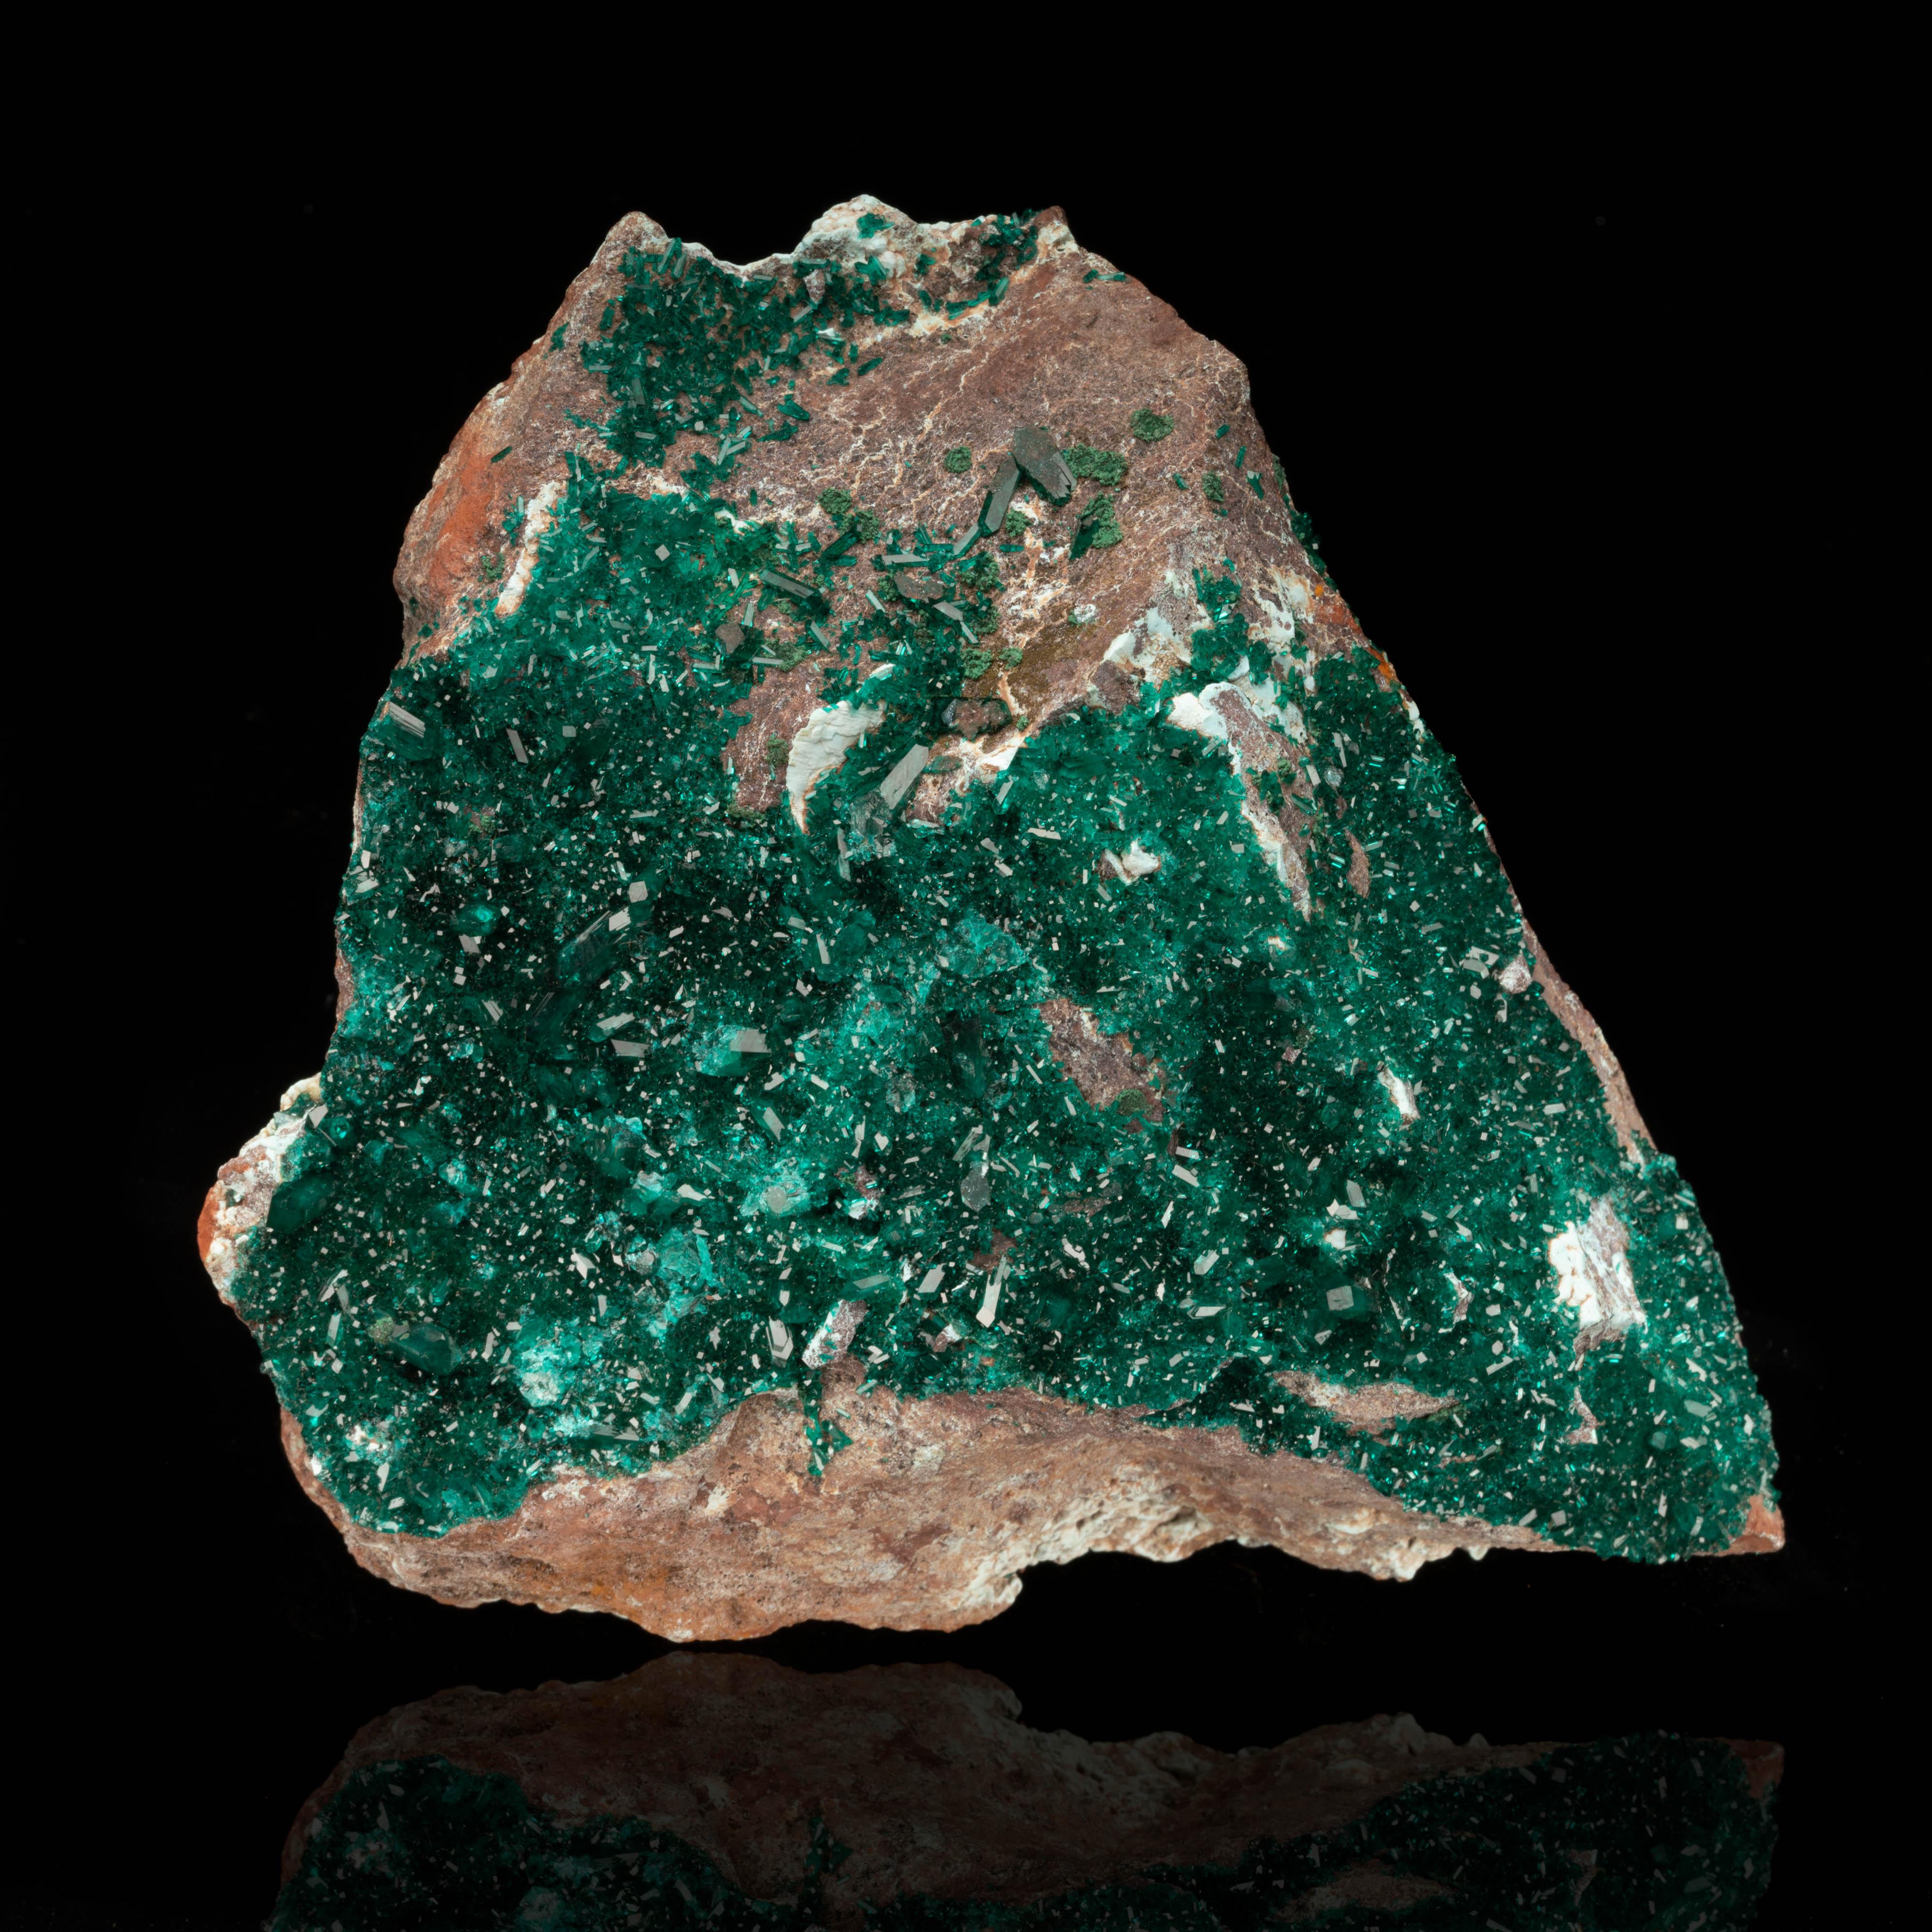 The name “dioptase” comes from Greek and references the visibility of the twin cleavage plains within the startlingly translucent, brilliantly emerald green crystals of this rare copper cyclosilicate mineral. This specimen boasts a glistening